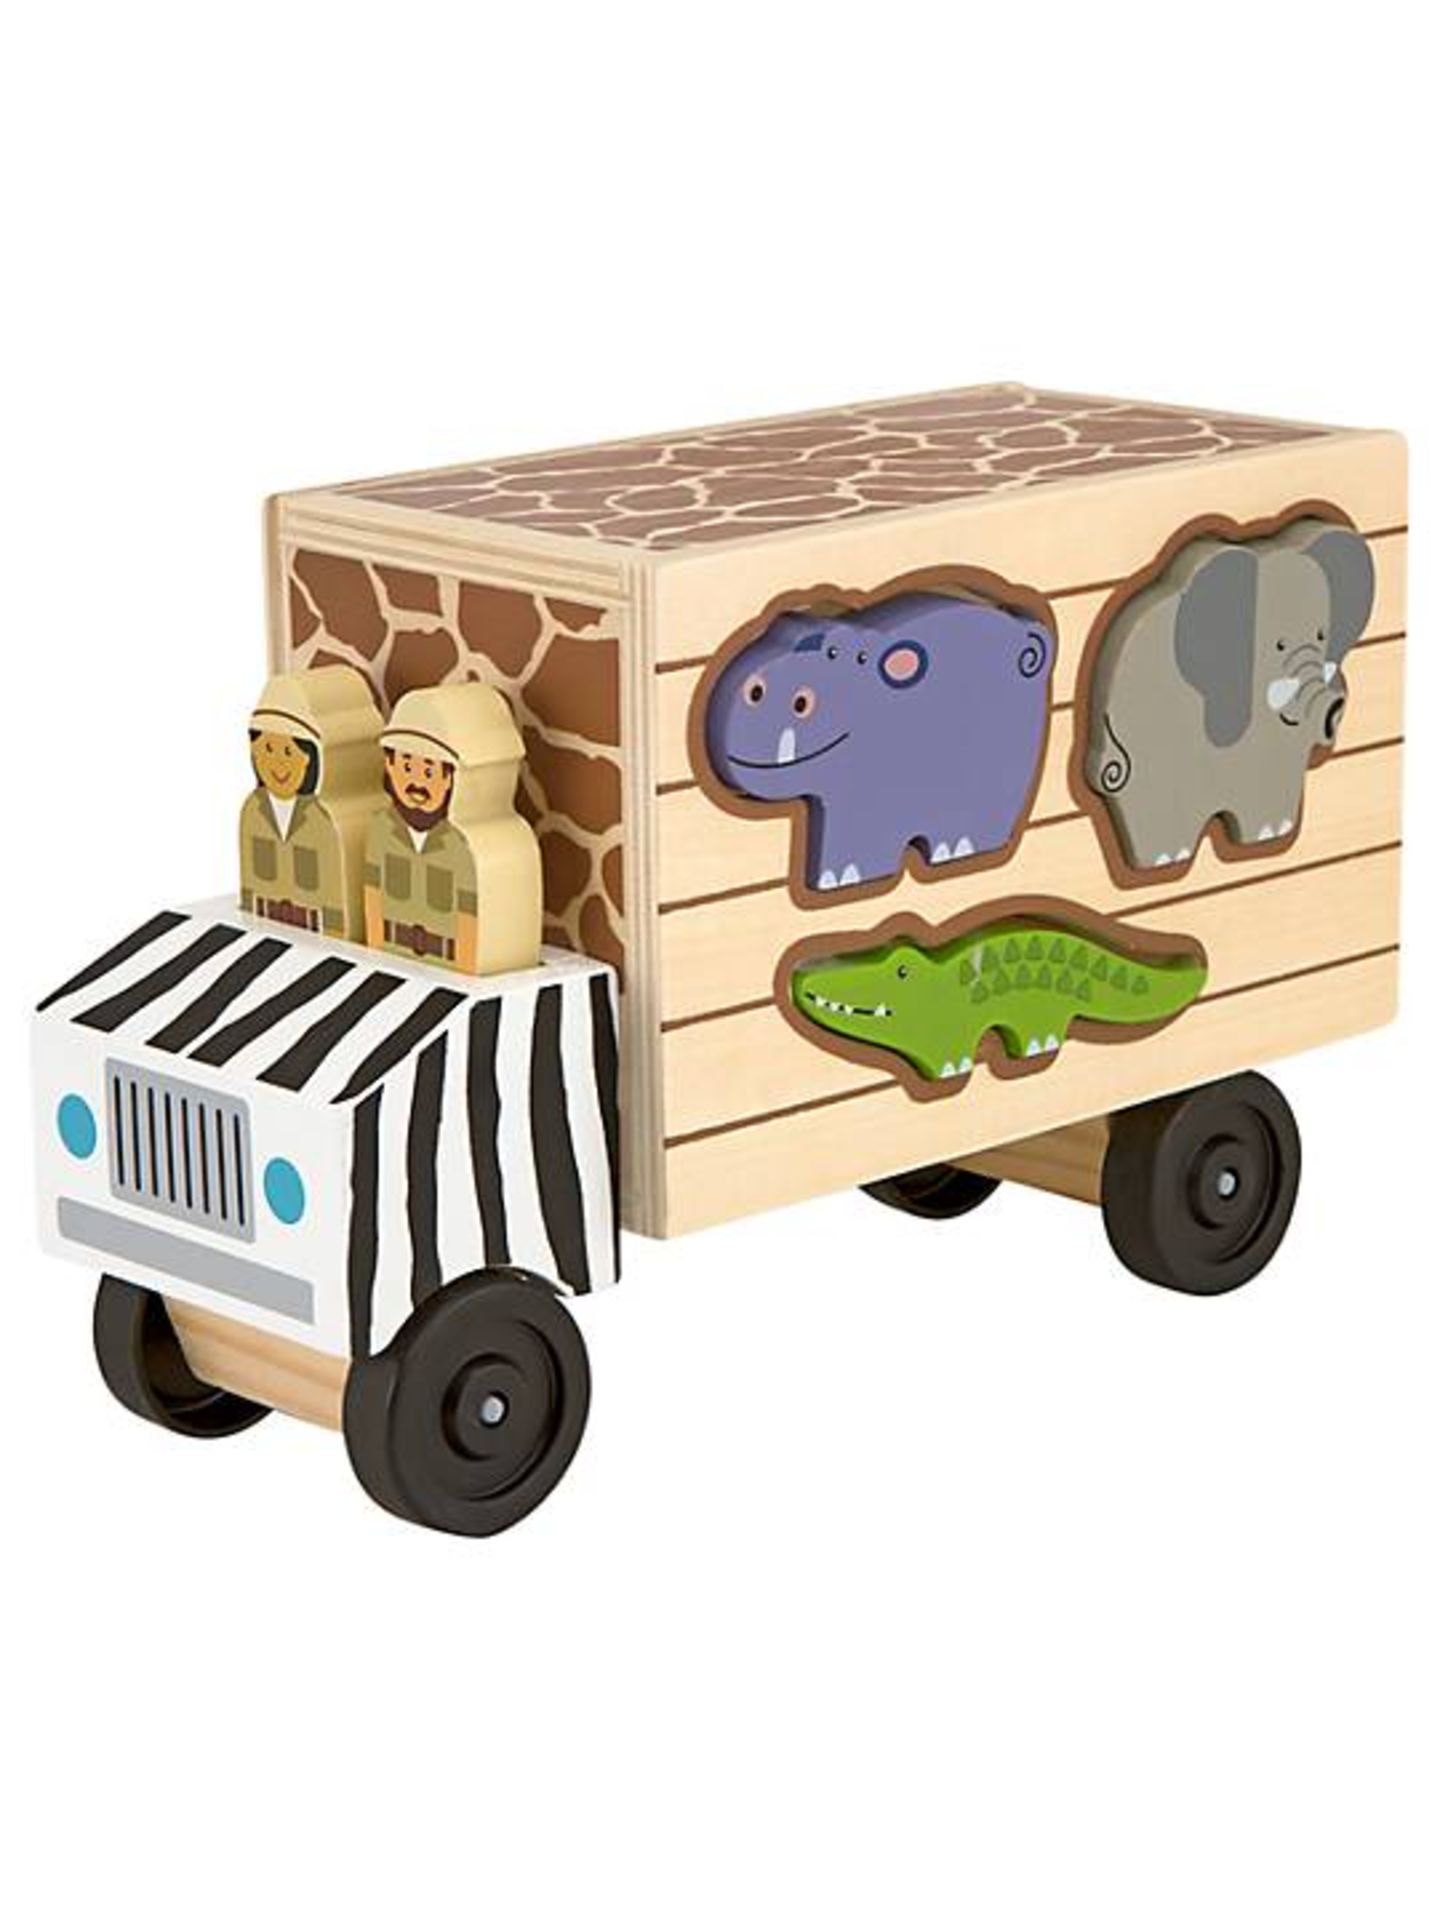 Pallet of Raw Customer Returns - Category - STANDARD TOYS - P100047400 - Image 16 of 18